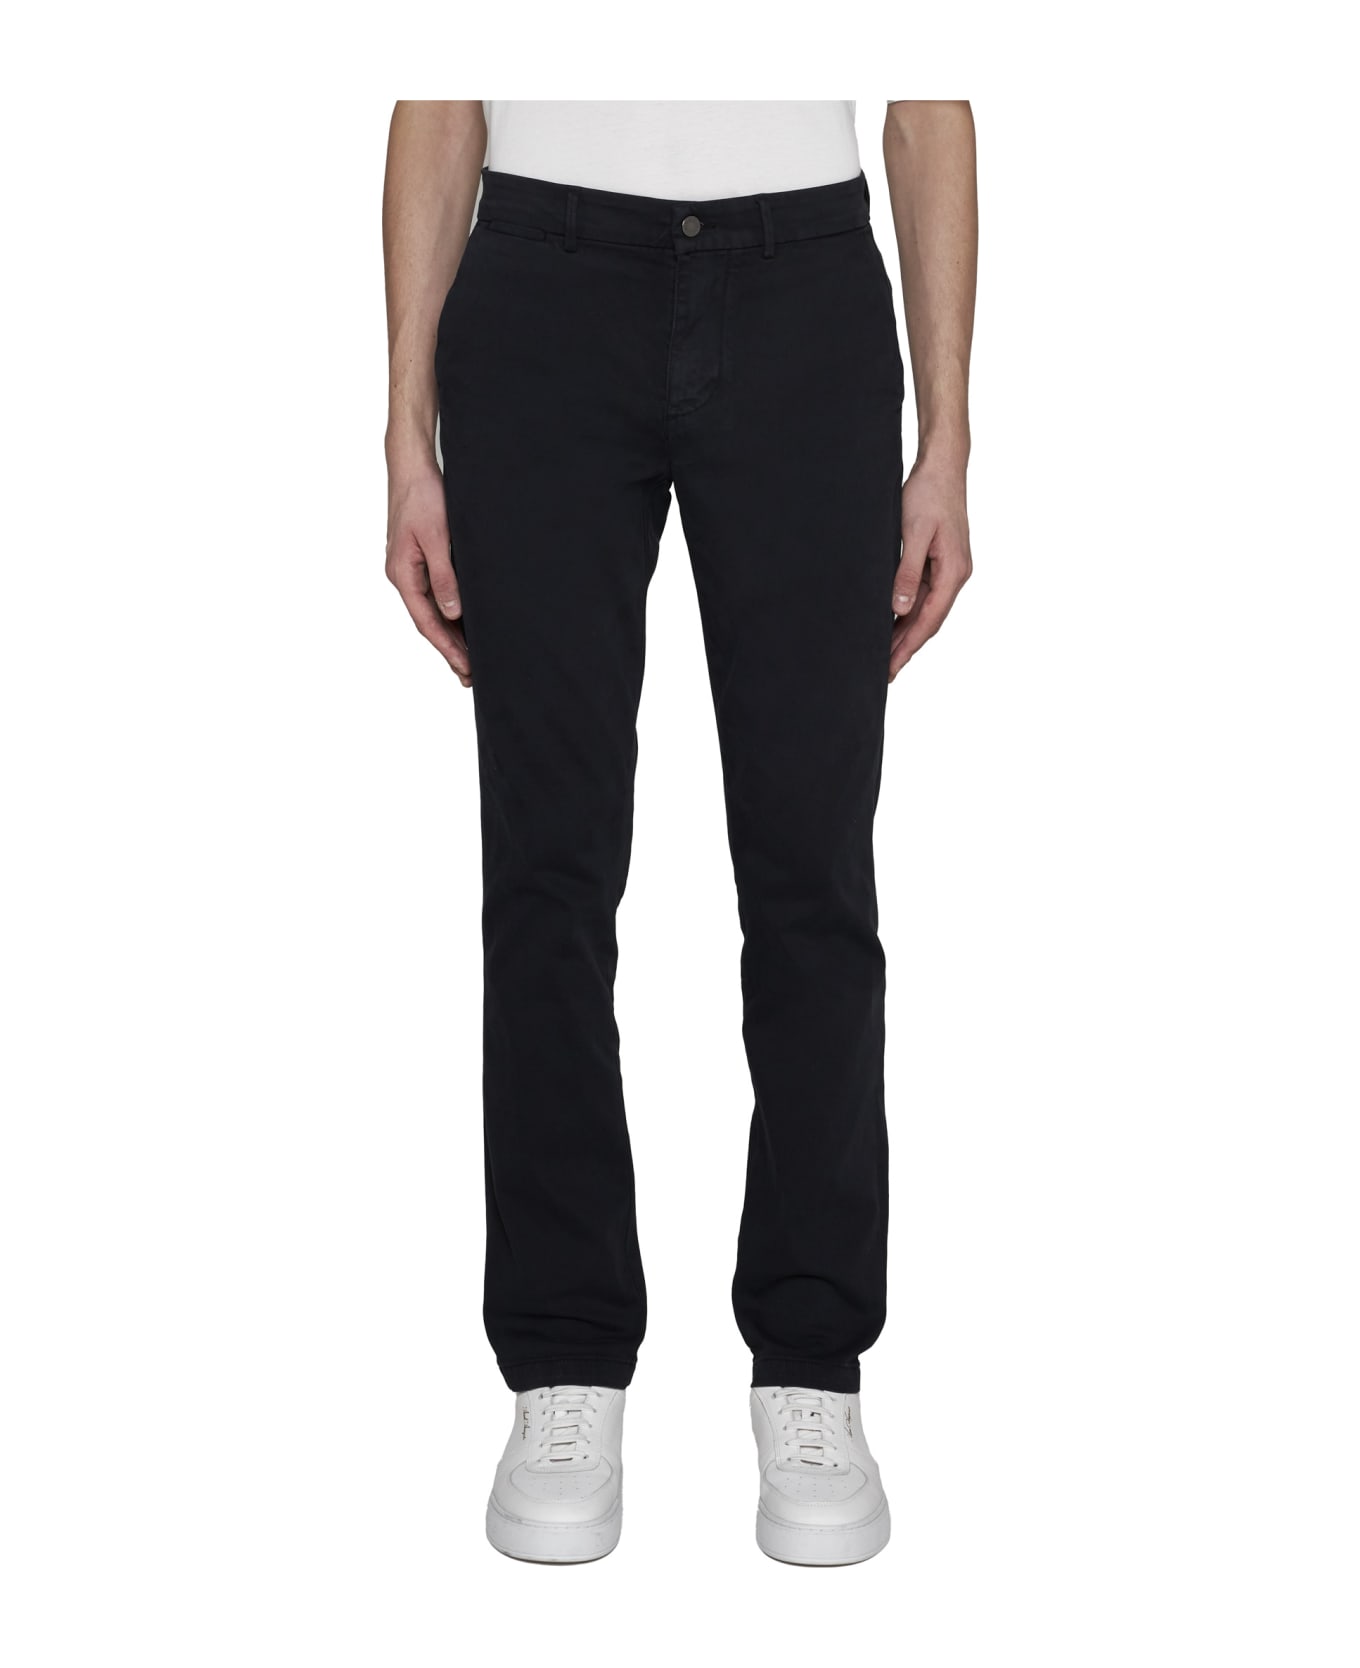 7 For All Mankind Pants - Black